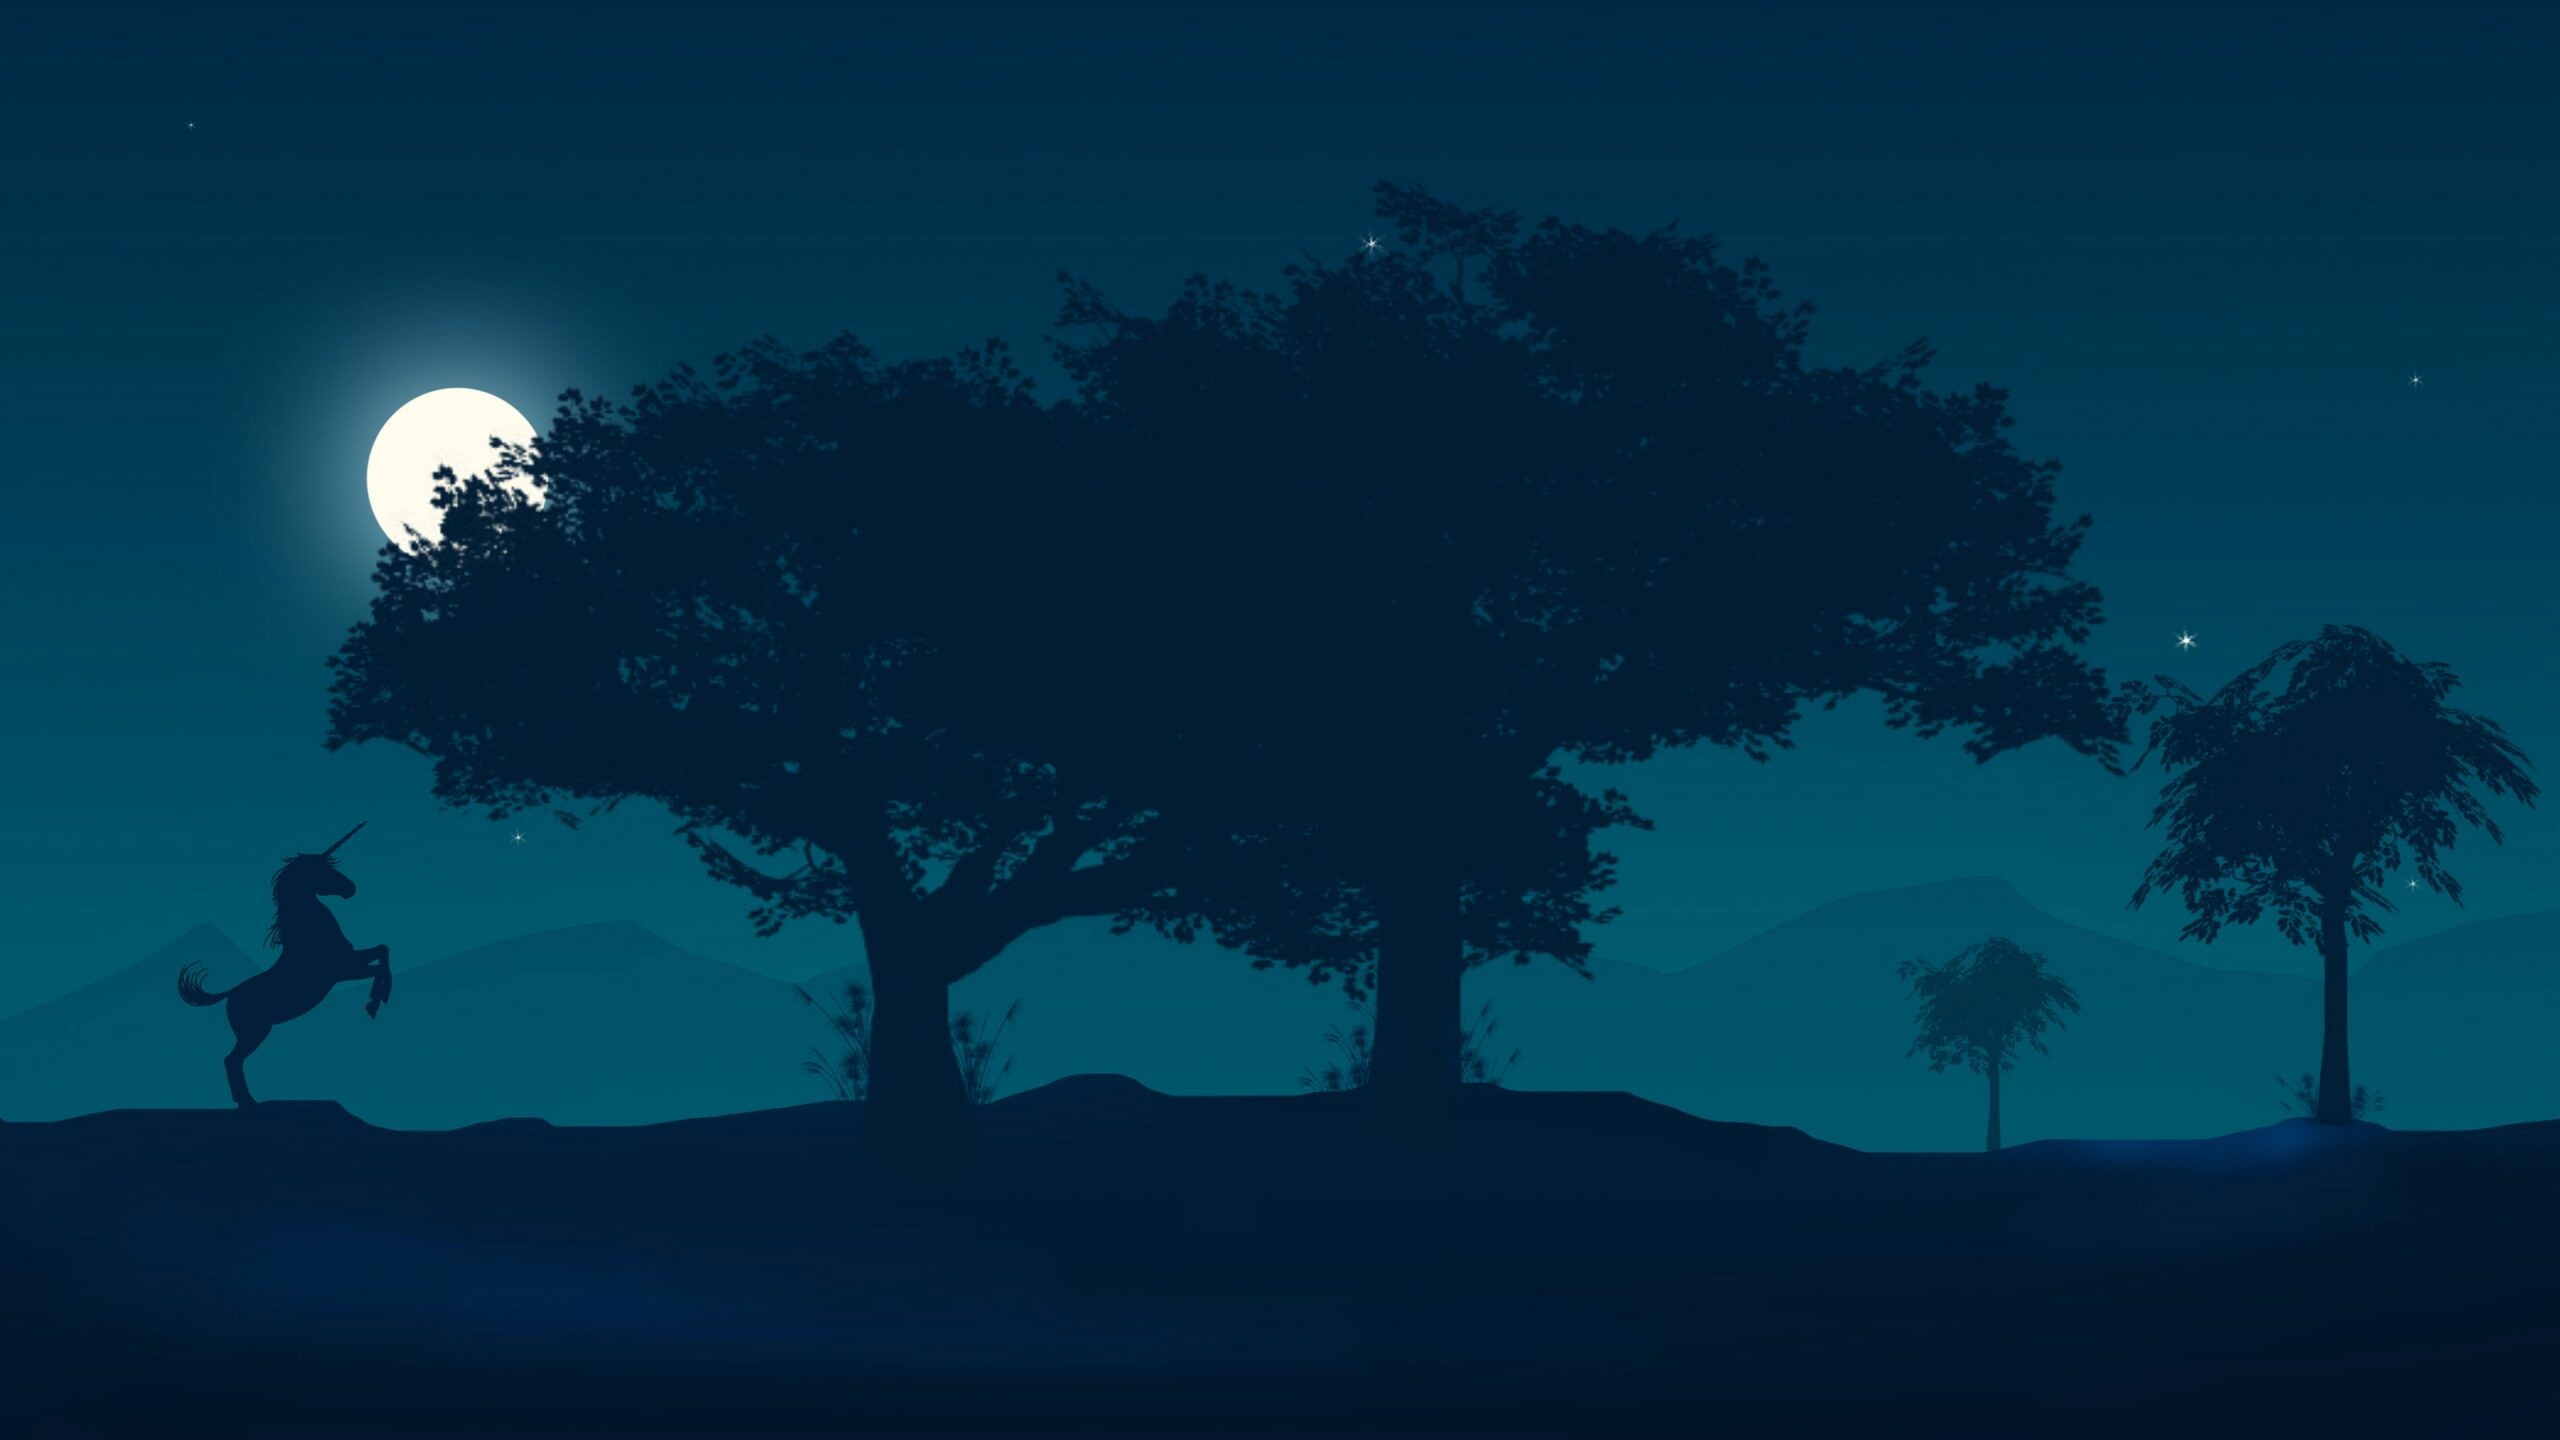 Moonlight: Moon, Night, The period of darkness between sunset and sunrise. 2560x1440 HD Wallpaper.